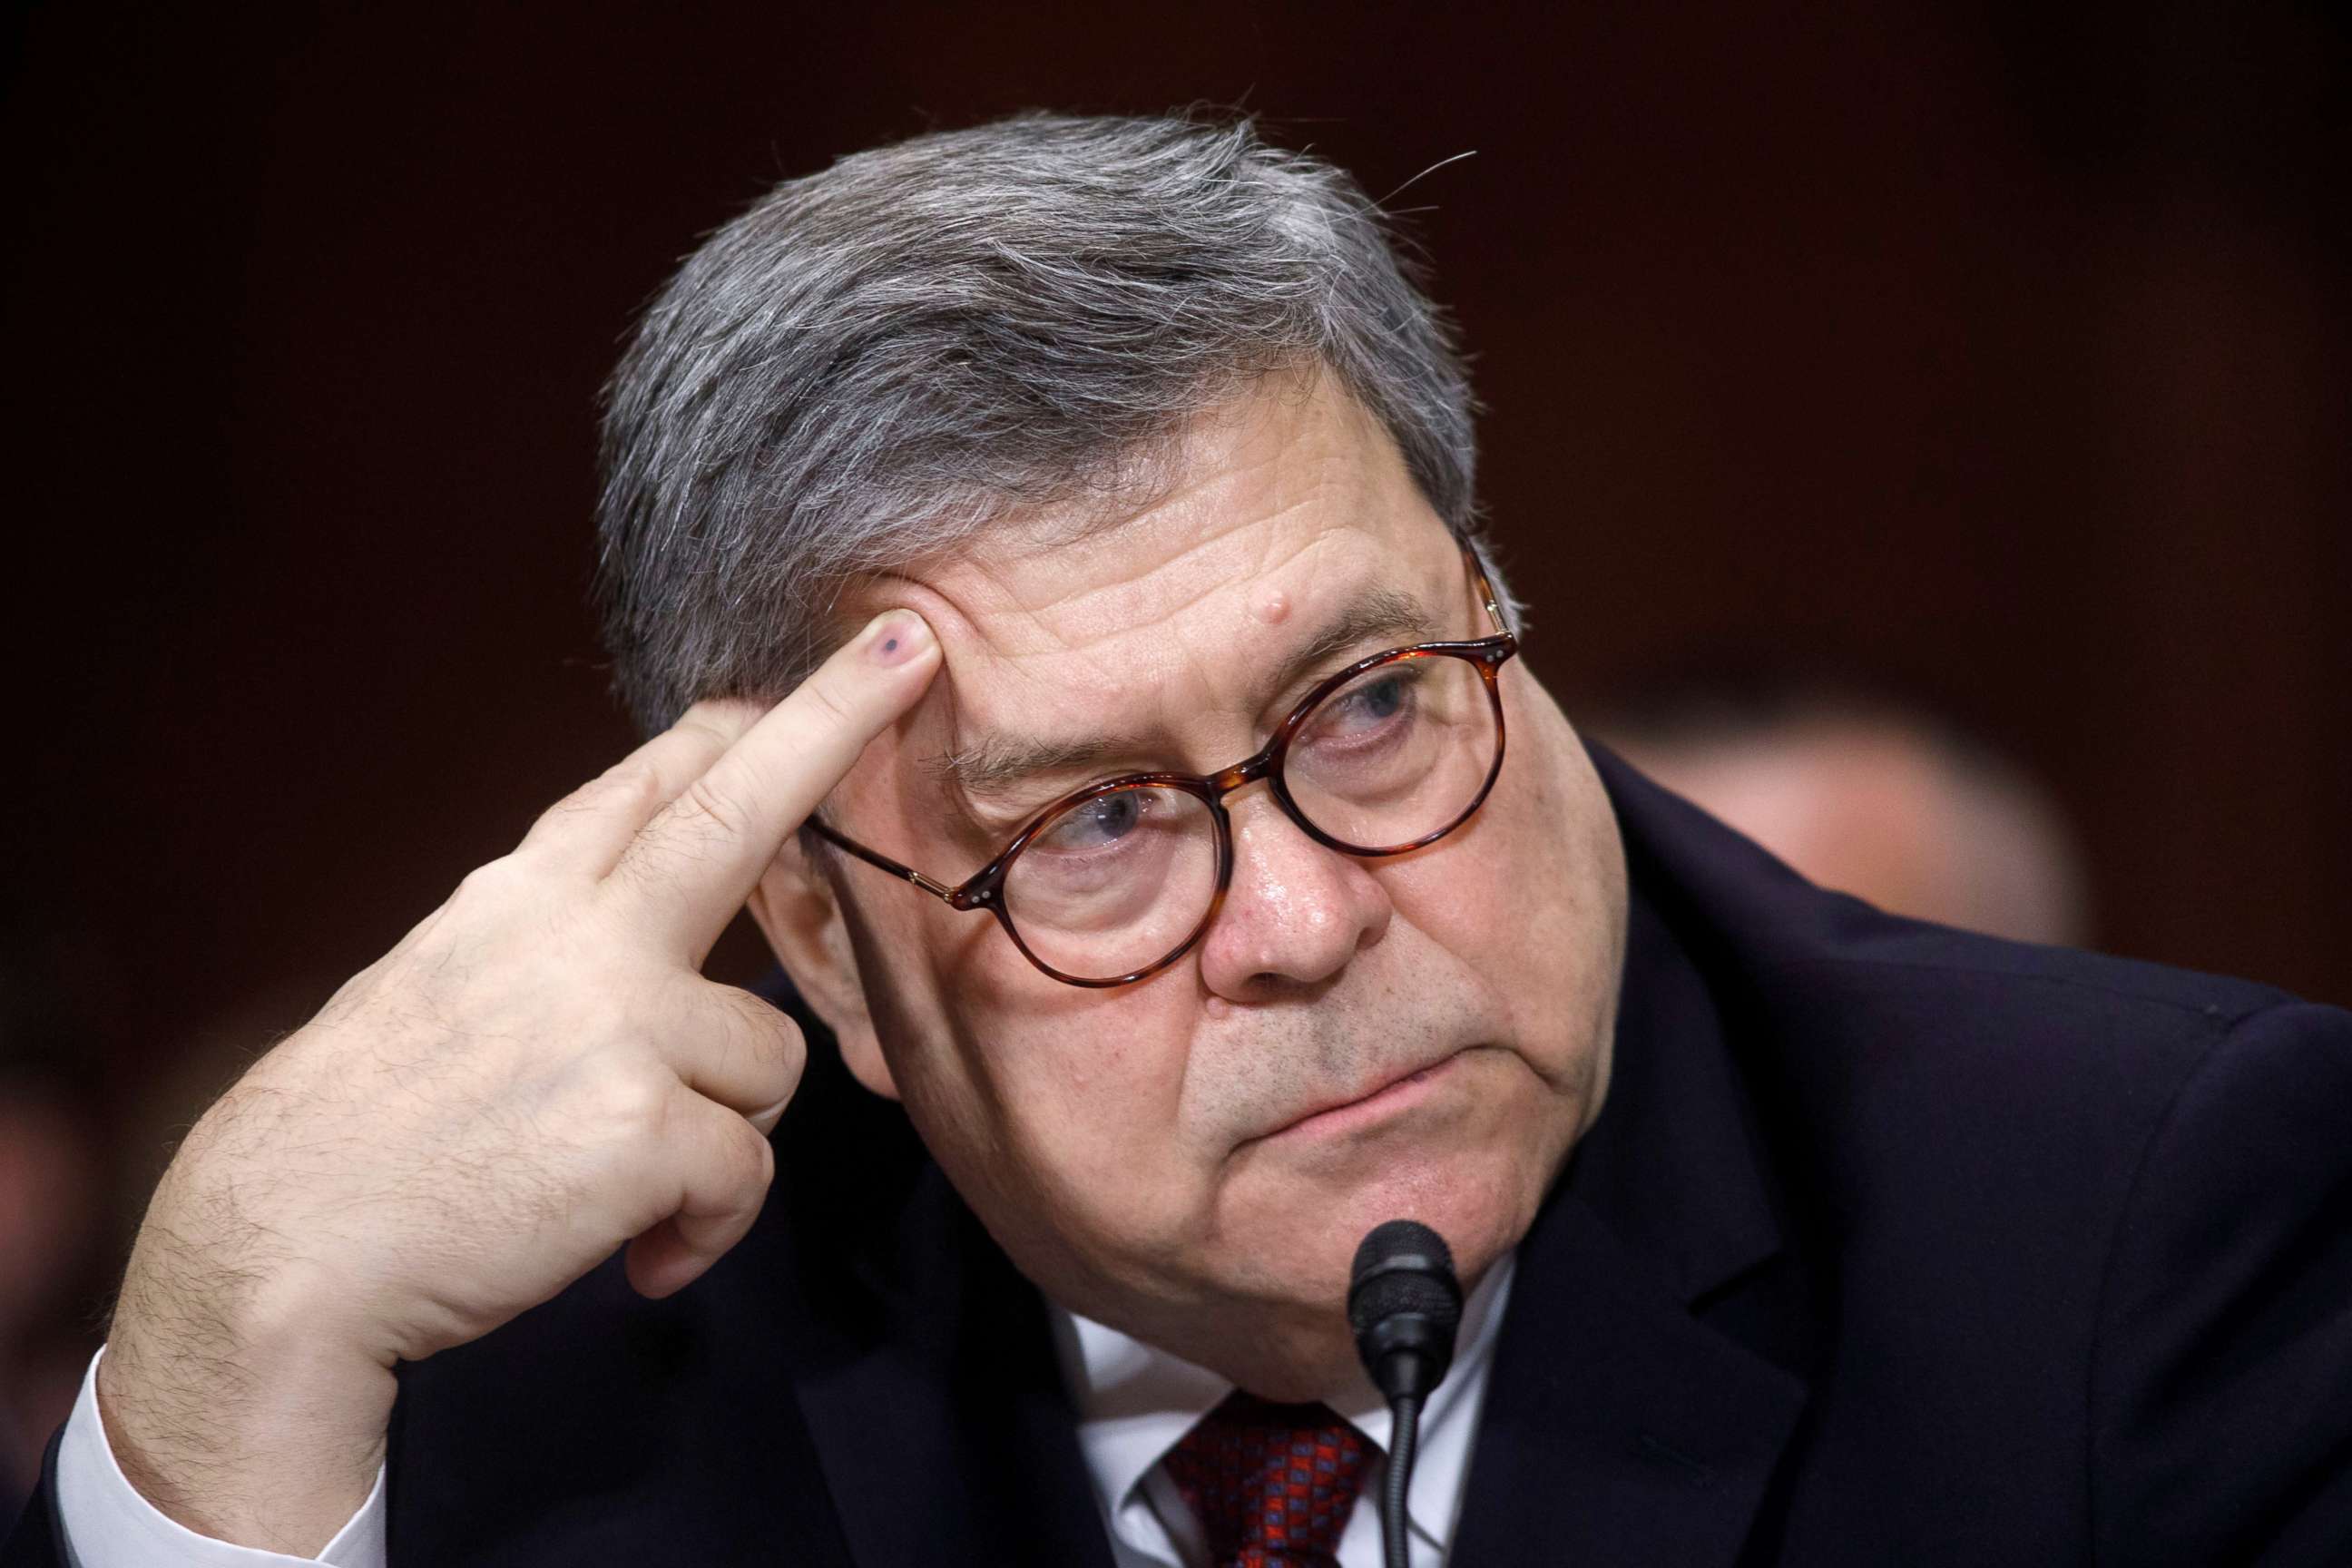 PHOTO: Attorney General William Barr testifies before the Senate Judiciary Committee's hearing on 'The Justice Department's Investigation of Russian Interference with the 2016 Presidential Election' on Capitol Hill in Washington, May 1, 2019.